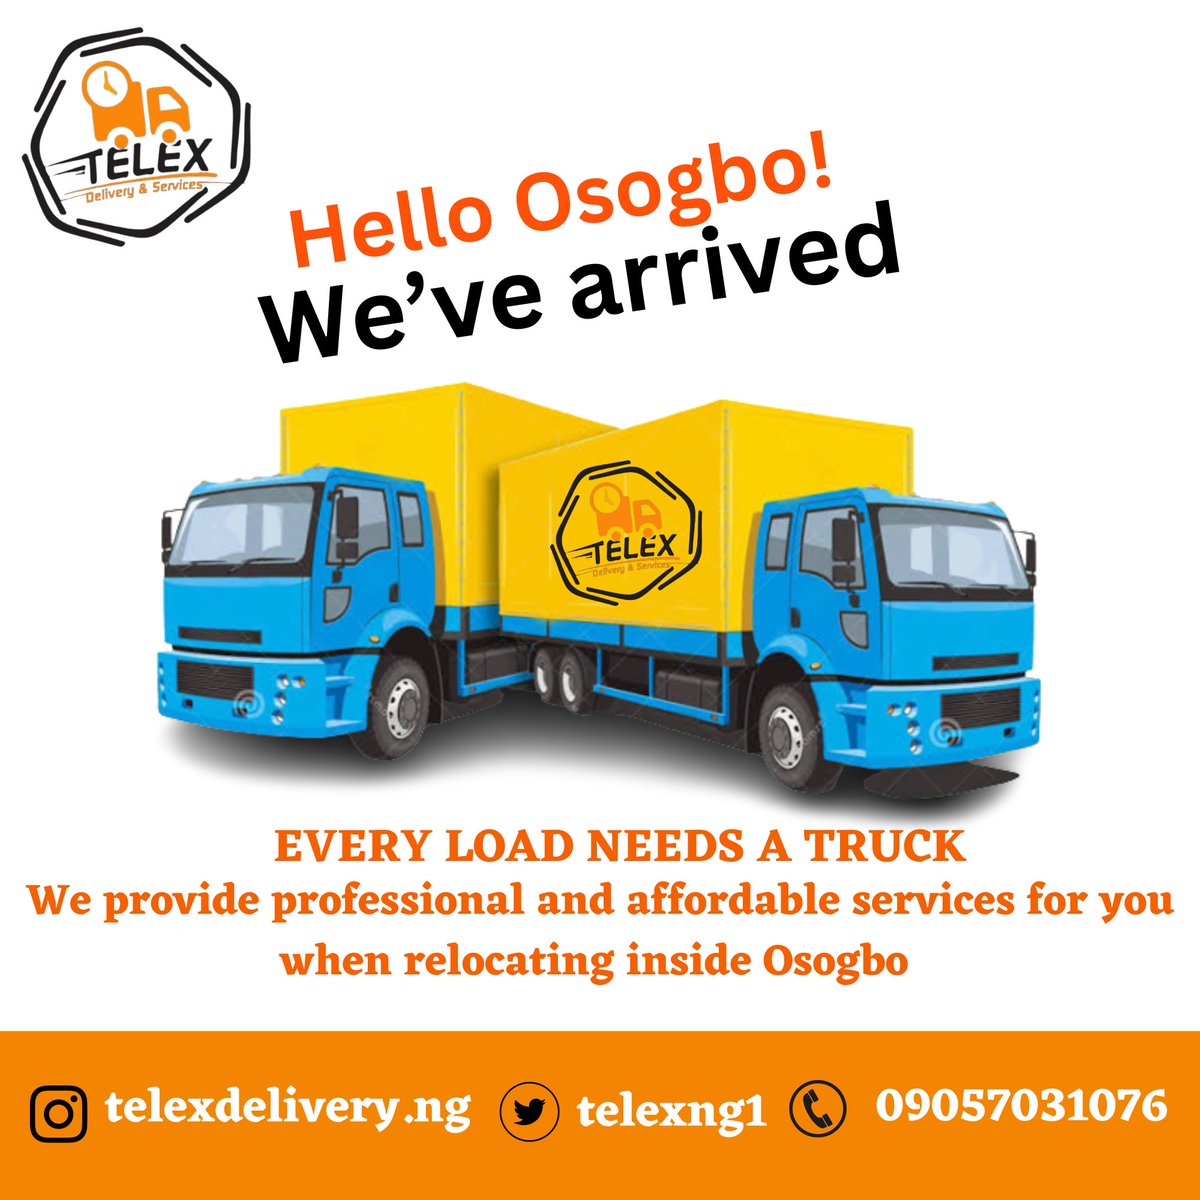 We are open for business as usual. You wanna relocate @InsideOsogbo and you need movers to help you pack your loads. Look no further. Telex Delivery is available 24/7 for all your Bookings without stress. 
.
.
.
.
#nostress #TuesdayFeeling #Tuesdaymorninglive